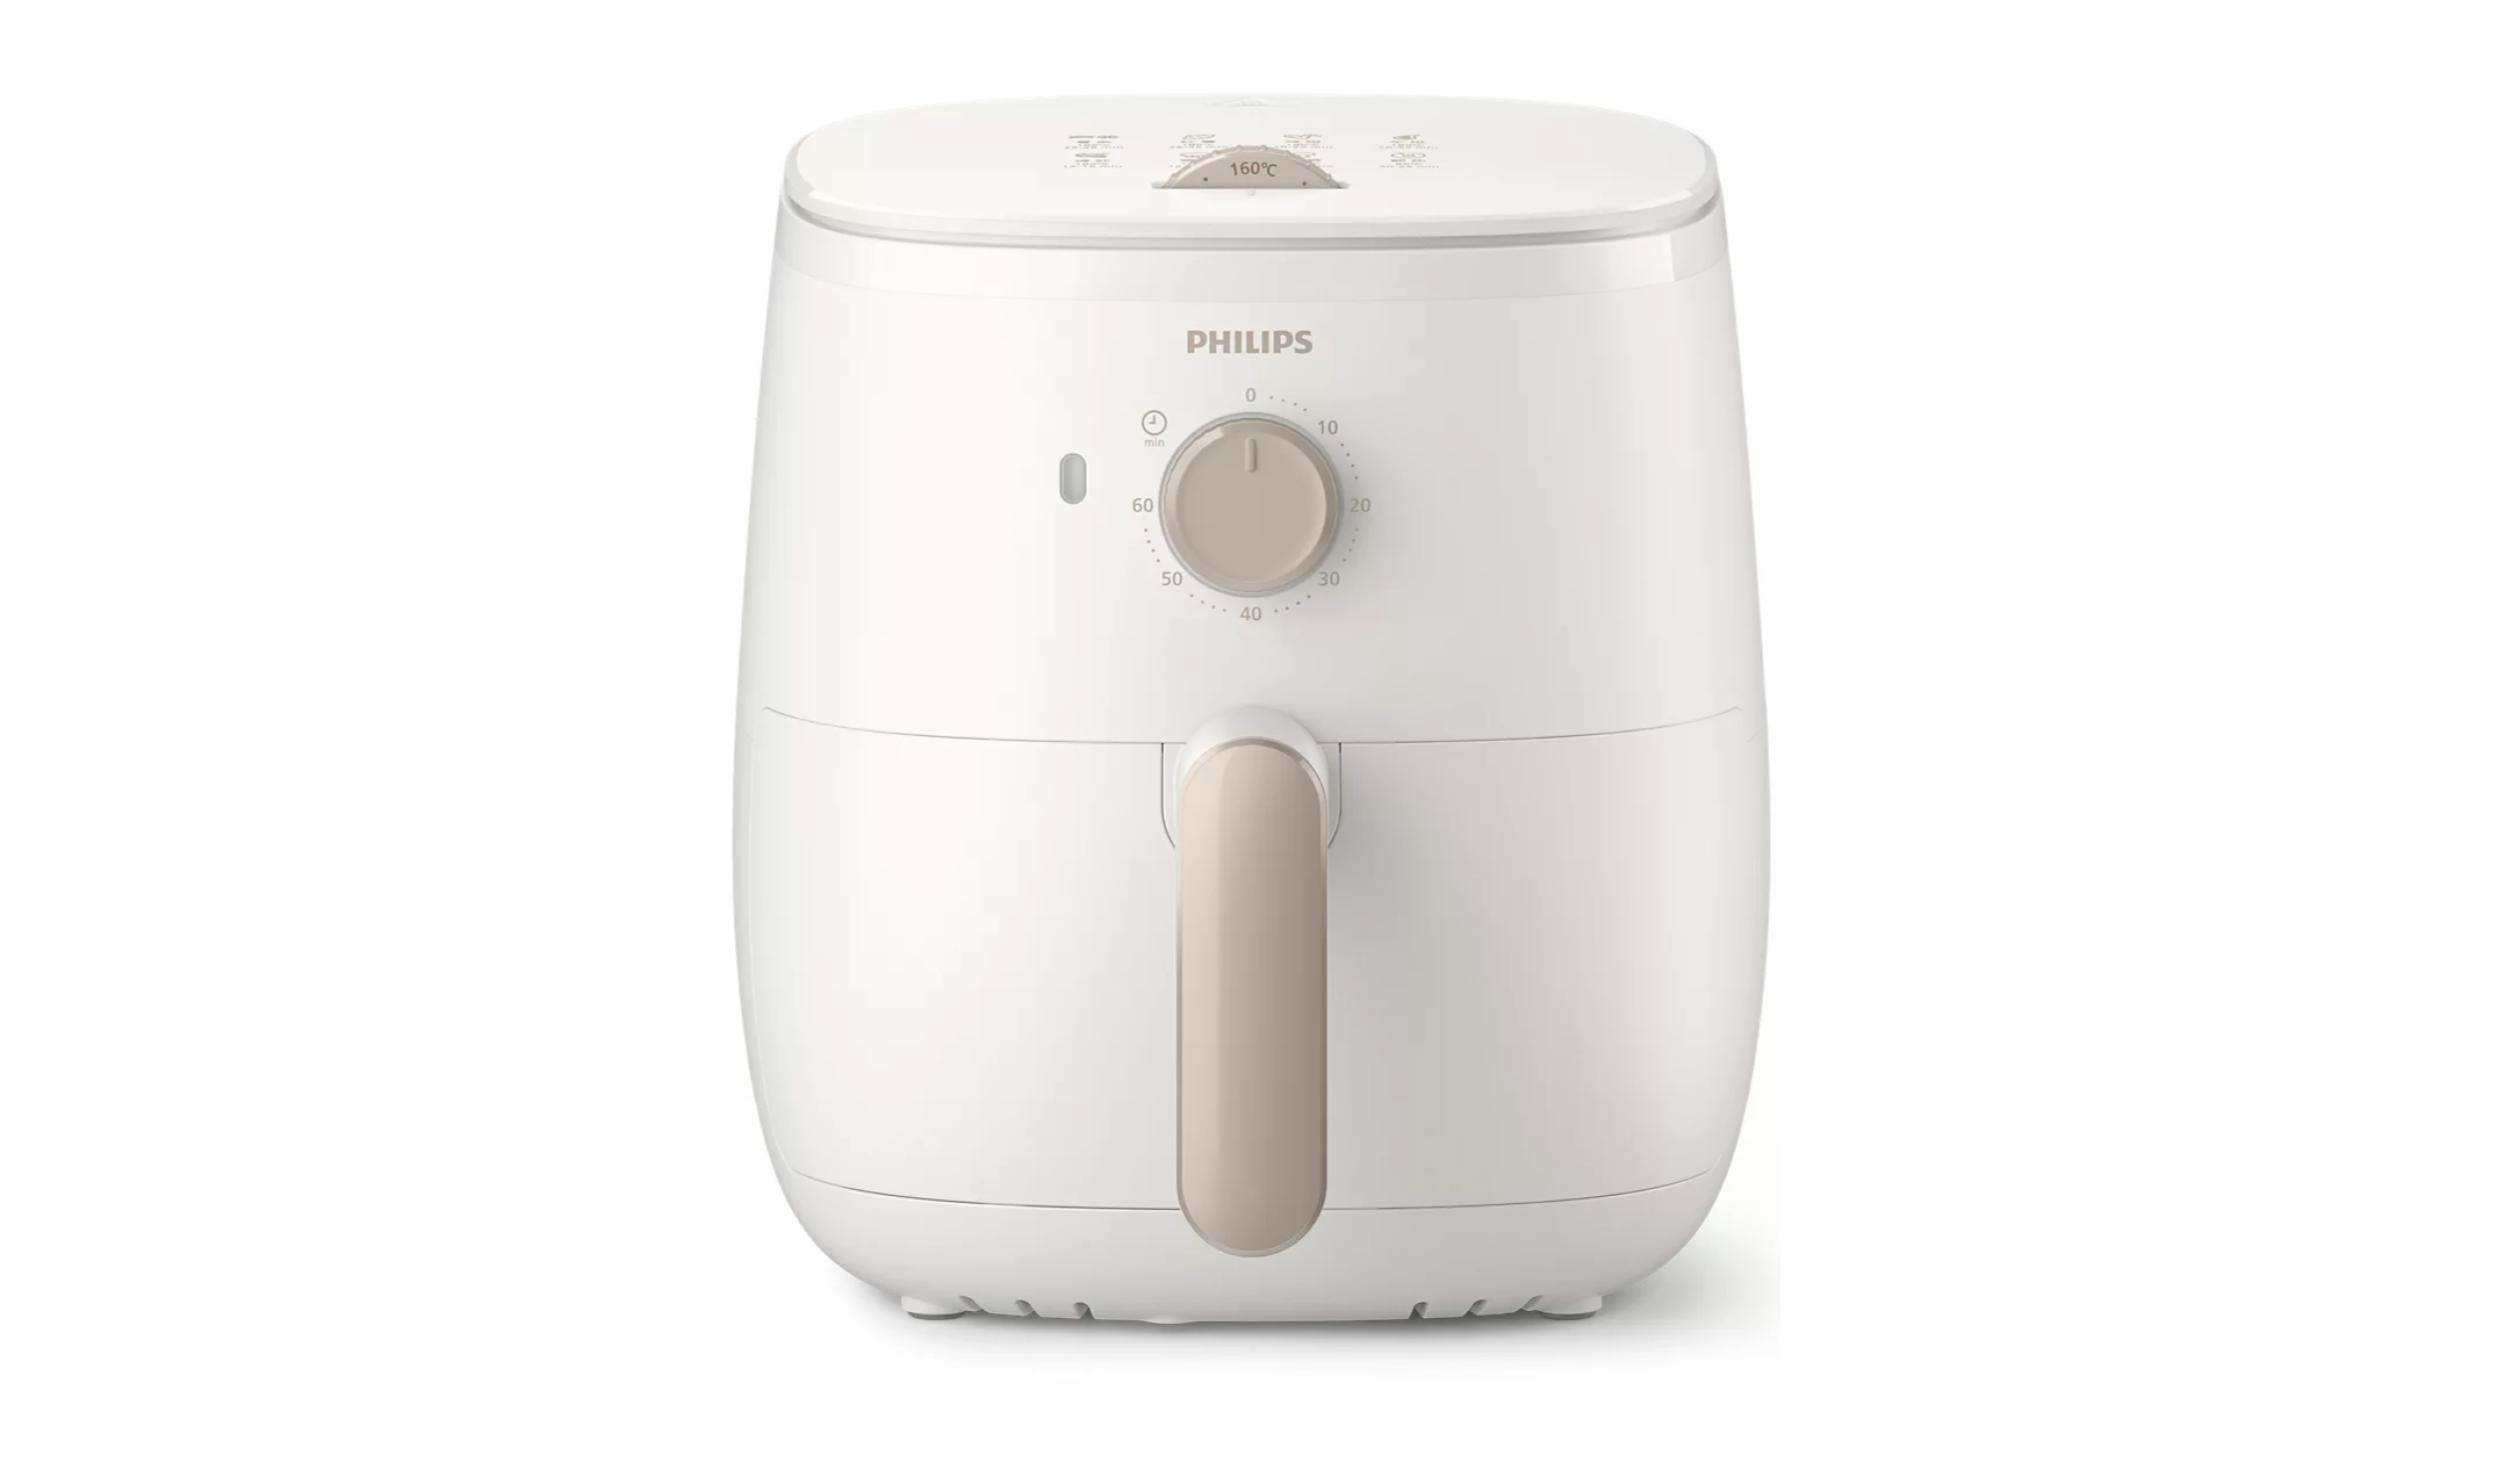 https://hnsgsfp.imgix.net/9/images/detailed/95/philips-airfryer-3000-series-l-compact-airfryer-white-hd9100.jpg?fit=fill&bg=0FFF&w=2500&h=1463&auto=format,compress